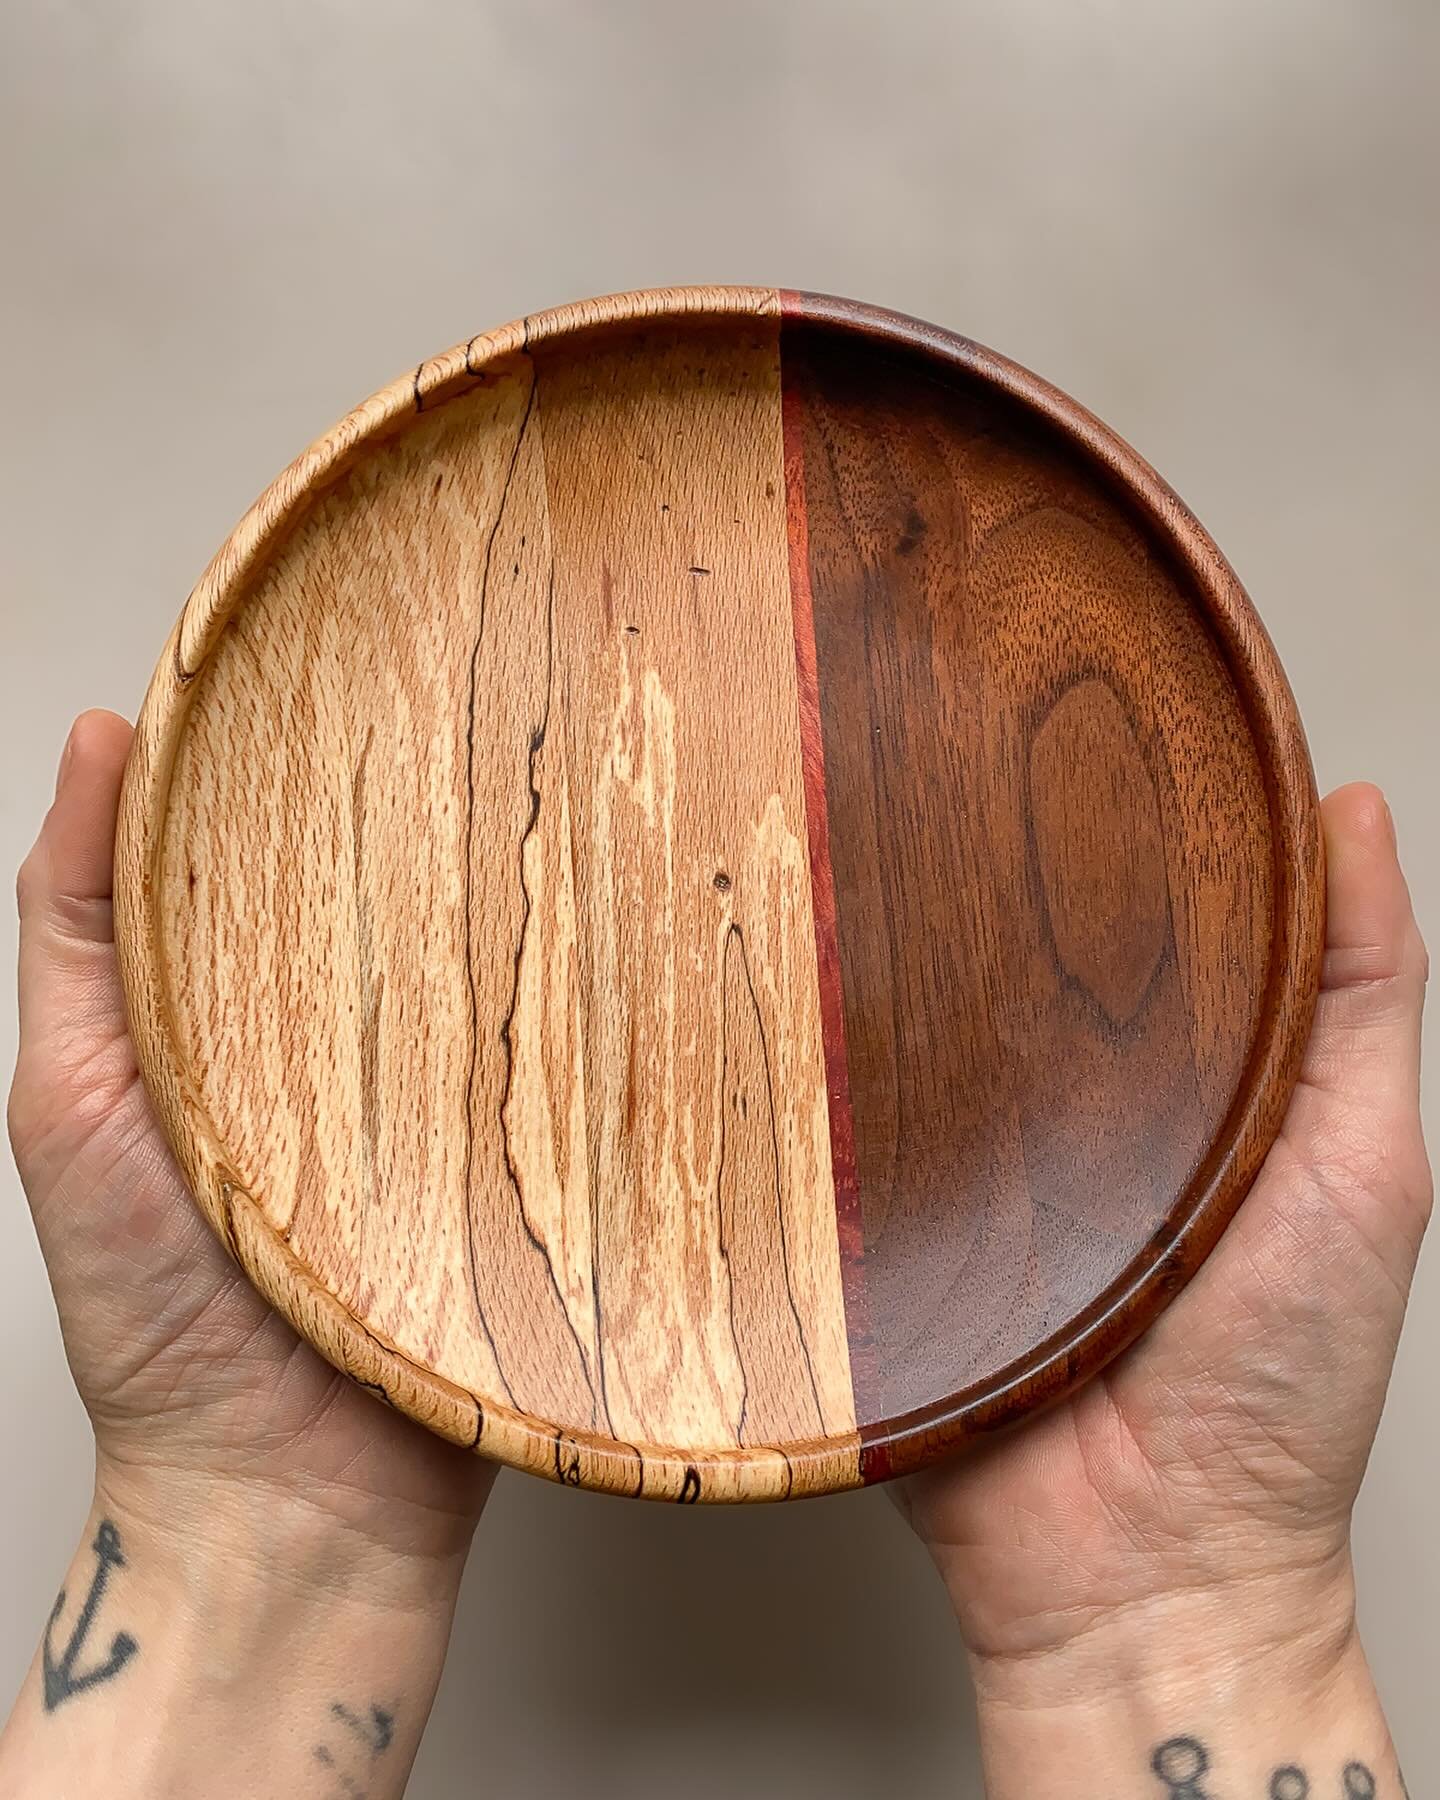 The Origin Story.
.
.
This is the first segmented catch tray I ever made and, as with almost all of my creative expressions, this design came about completely unintentionally.

I had been turning for a few months, getting more comfortable with explor